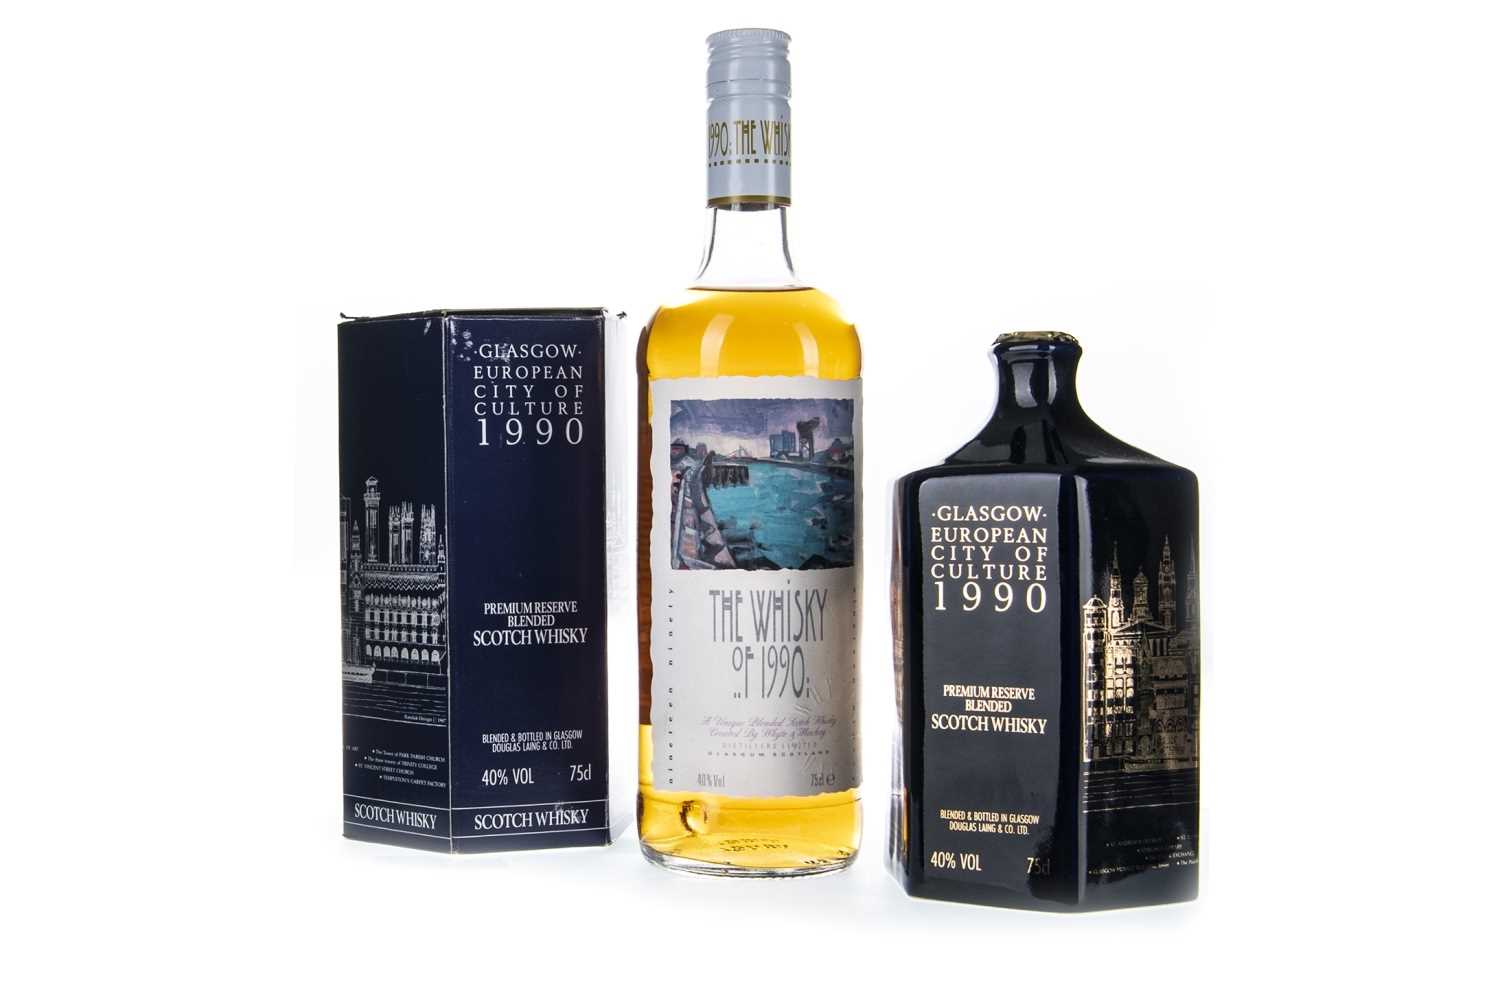 Lot 406 - GLASGOW EUROPEAN CITY OF CULTURE 1990 AND WHISKY OF 1990